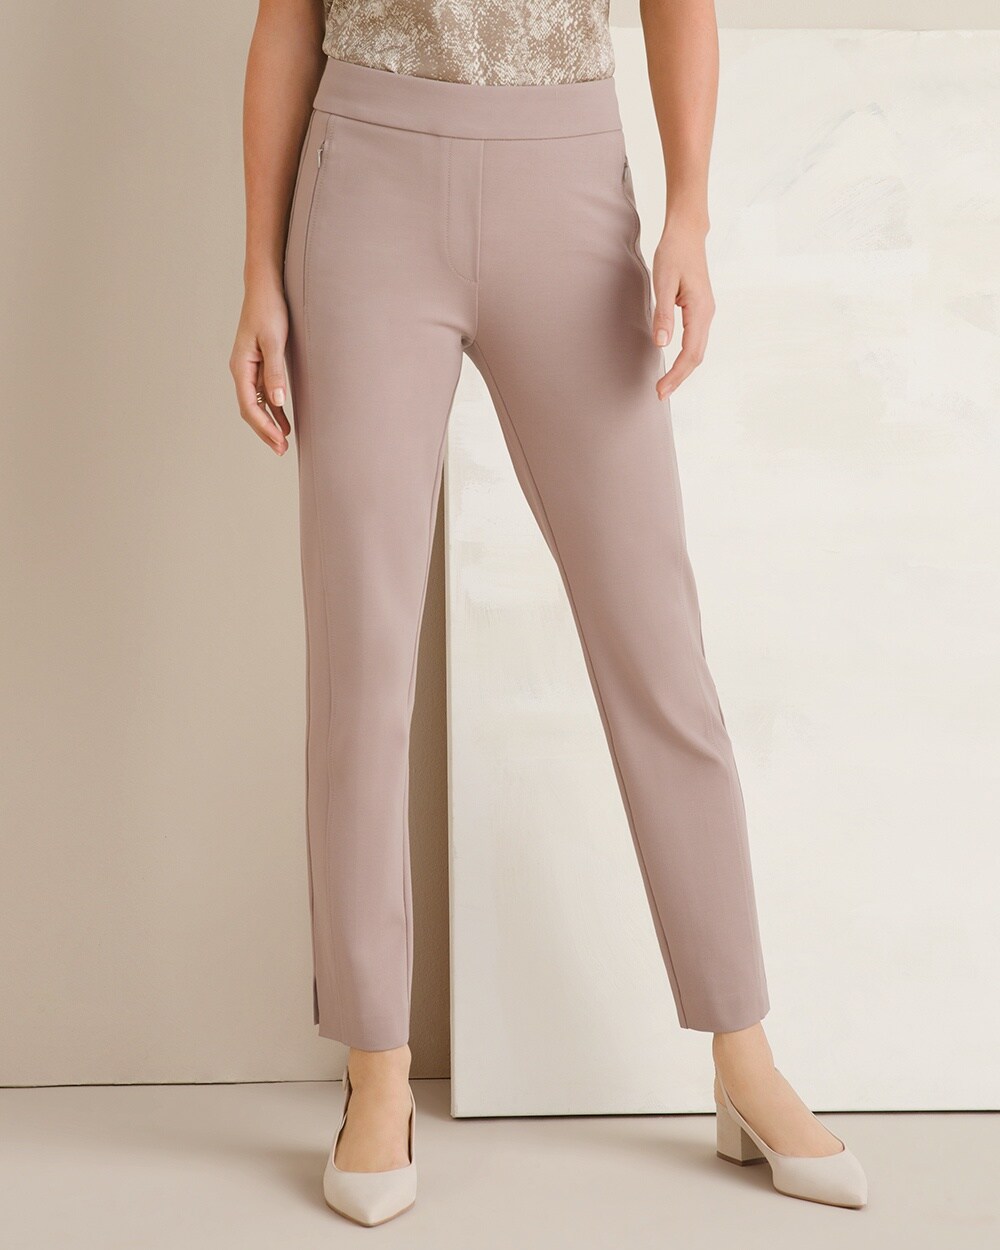 So Slimming 360 Juliet Ankle Pants - Chico's